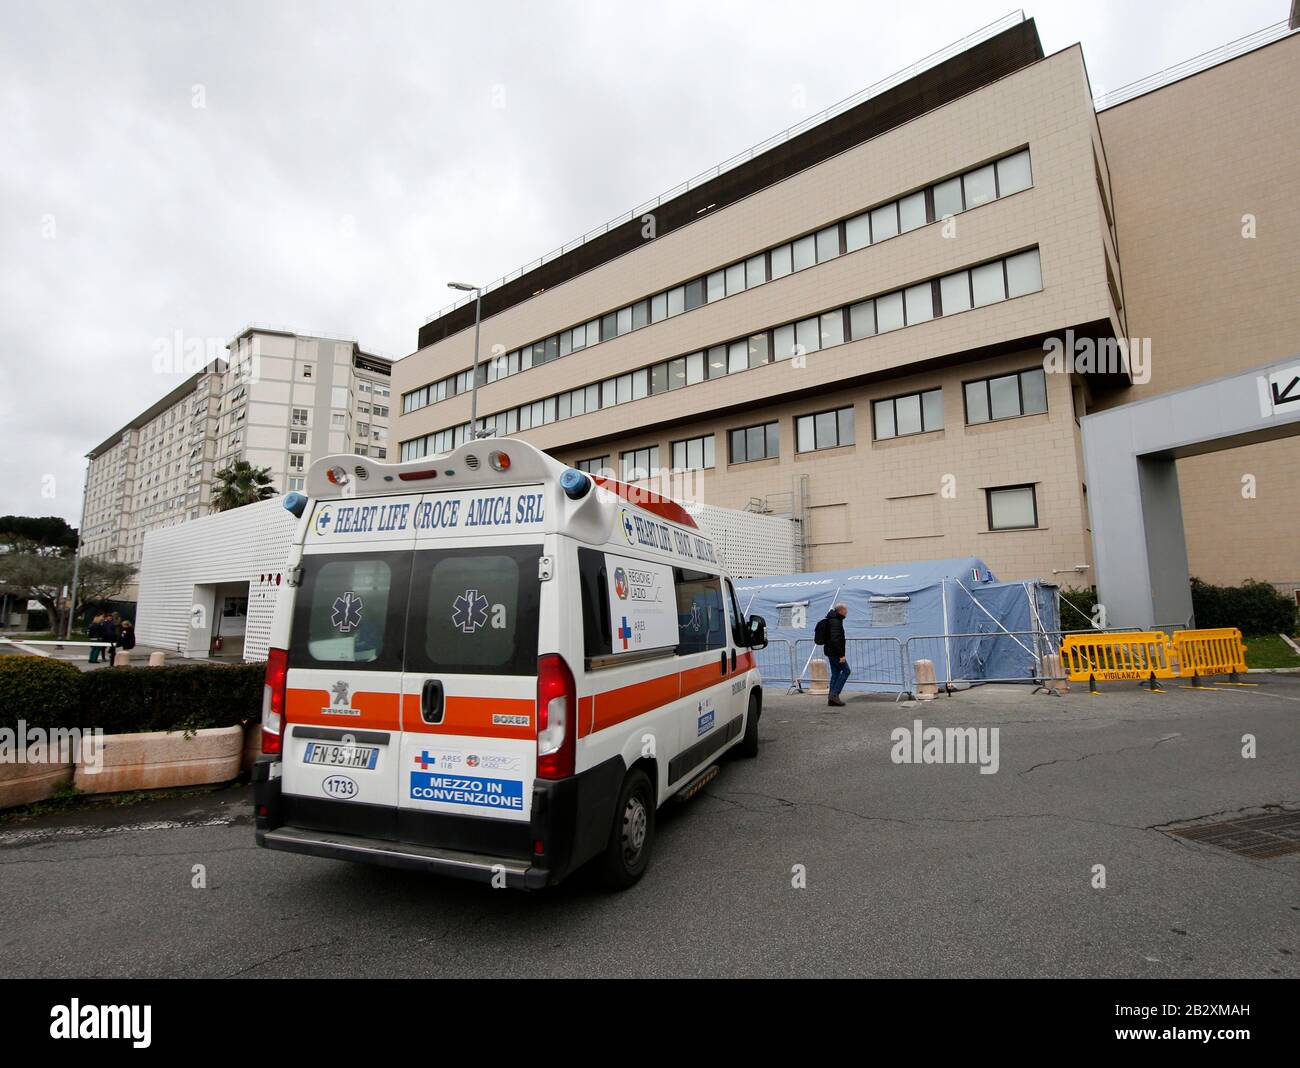 Rome. 3rd Mar, 2020. Photo taken on March 3, 2020 shows the pre-triage tents set up outside Agostino Gemelli Hospital in Rome, Italy. Italian authorities on Tuesday confirmed 2,263 coronavirus cases, which marked an increase of 428 infections compared to the previous day. The figure did not include recoveries or fatalities, whose numbers were provided separately. Credit: Alberto Lingria/Xinhua/Alamy Live News Stock Photo